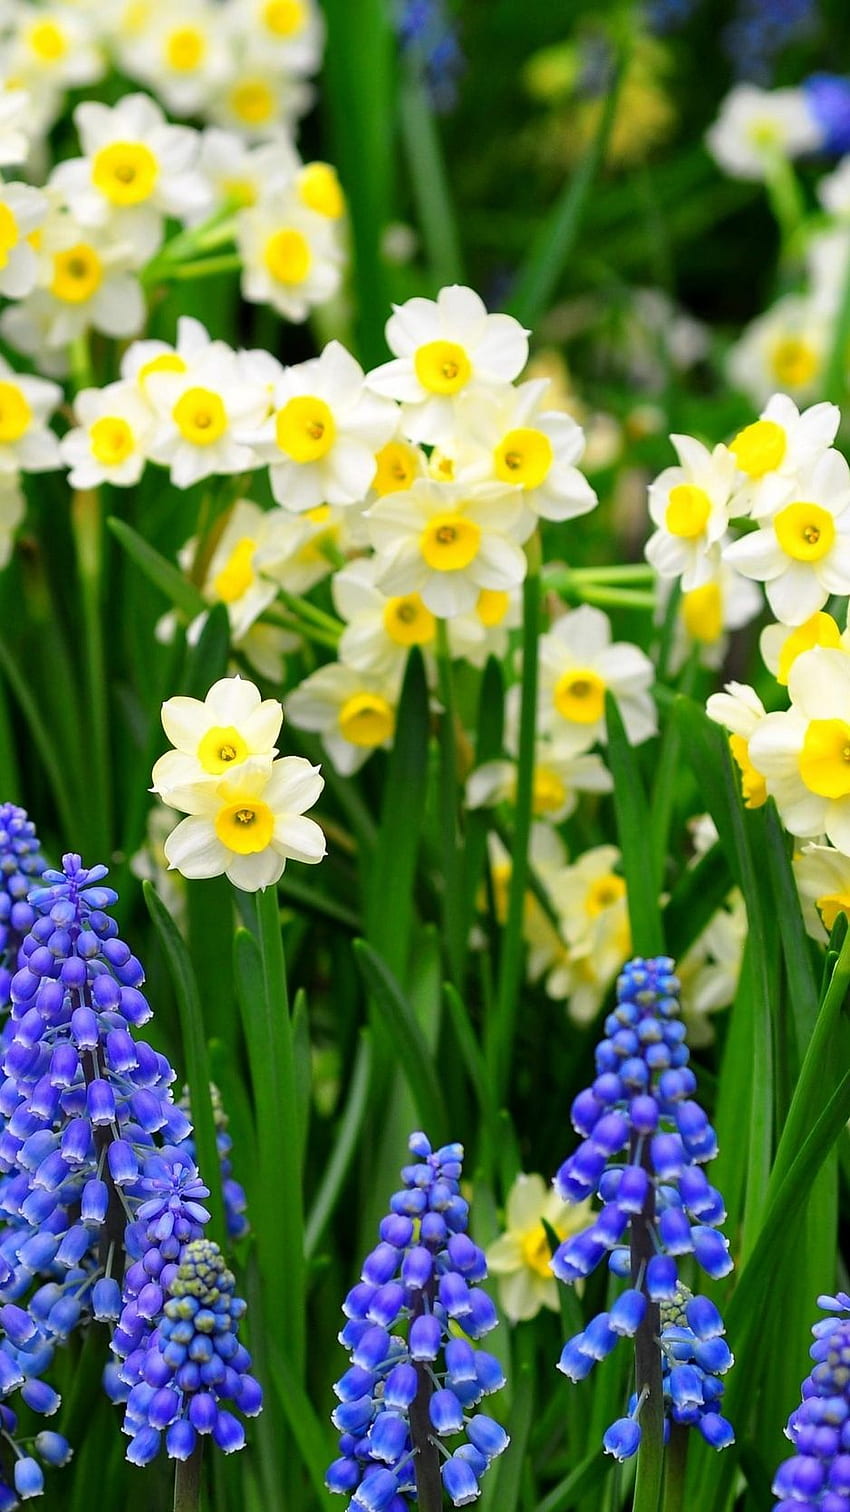 Details more than 65 daffodil wallpaper best - in.cdgdbentre